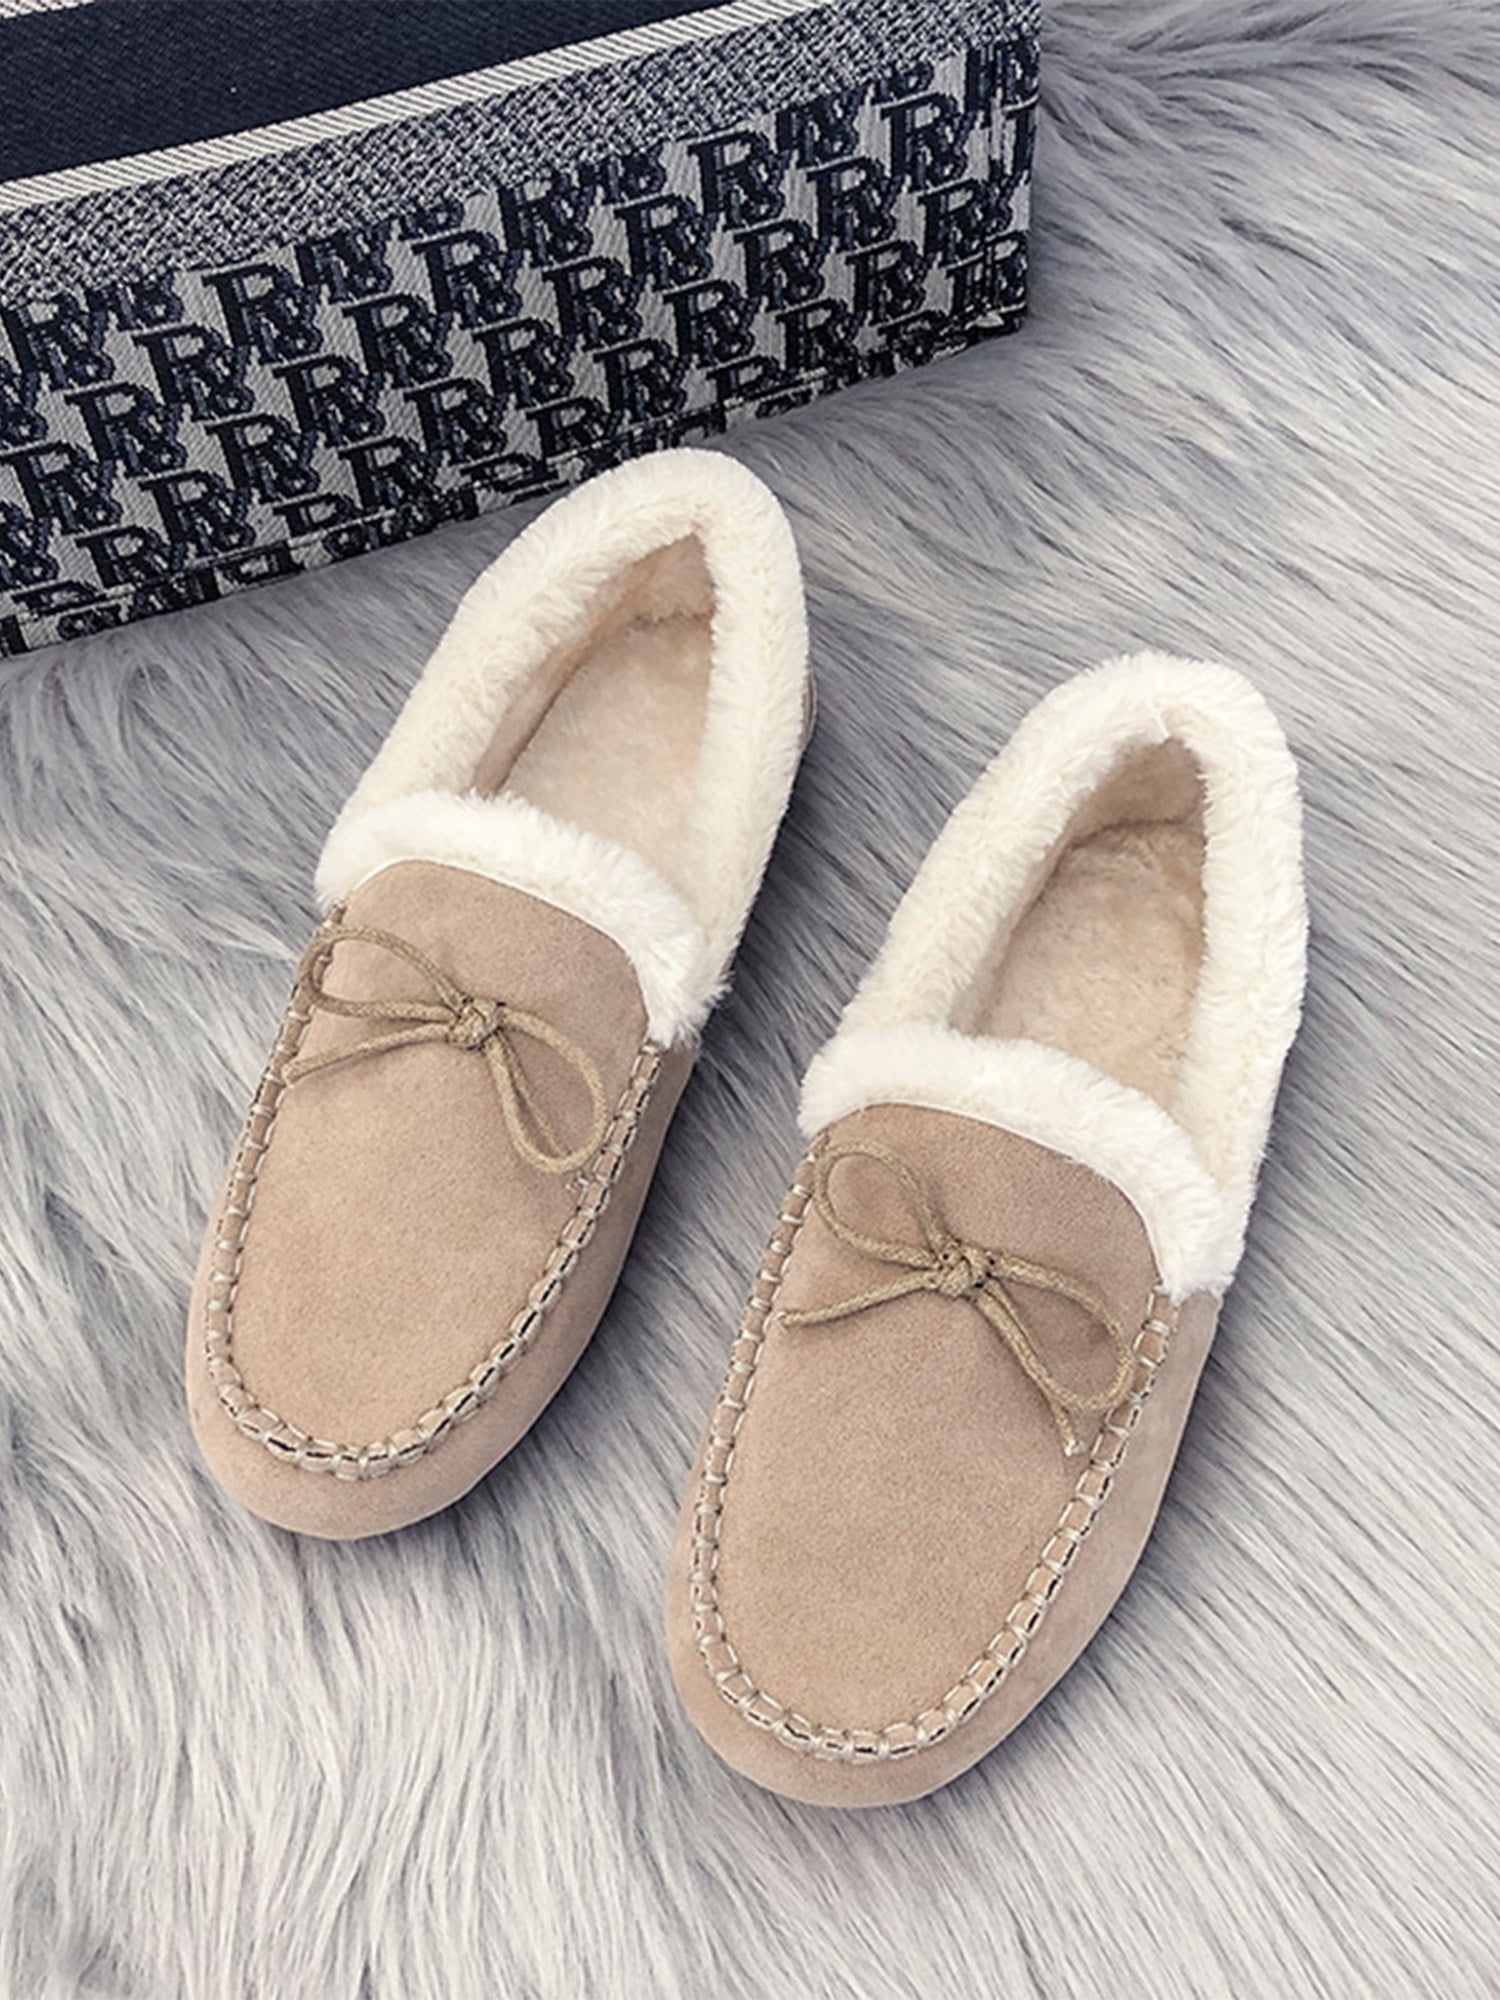 100% Leather Brown Navy Women Ladies Indoor Shoes Slippers Warm Moccasins 